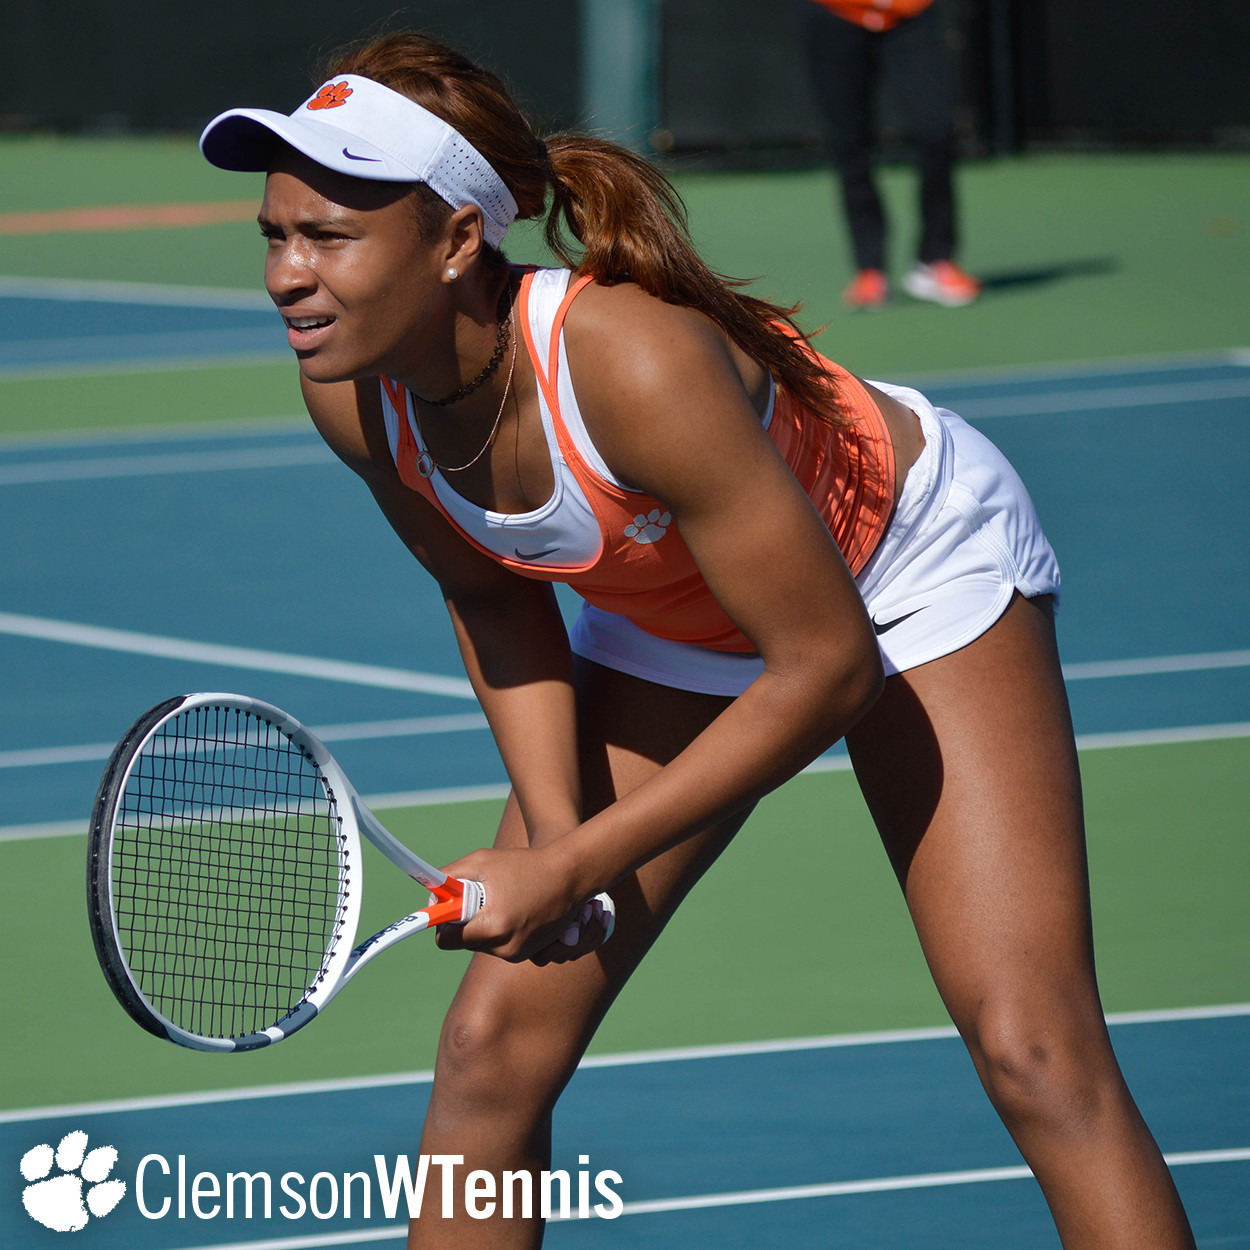 Broomfield Upsets Top-5 Singles Player in Clemson‘s Road Loss to #3 UNC